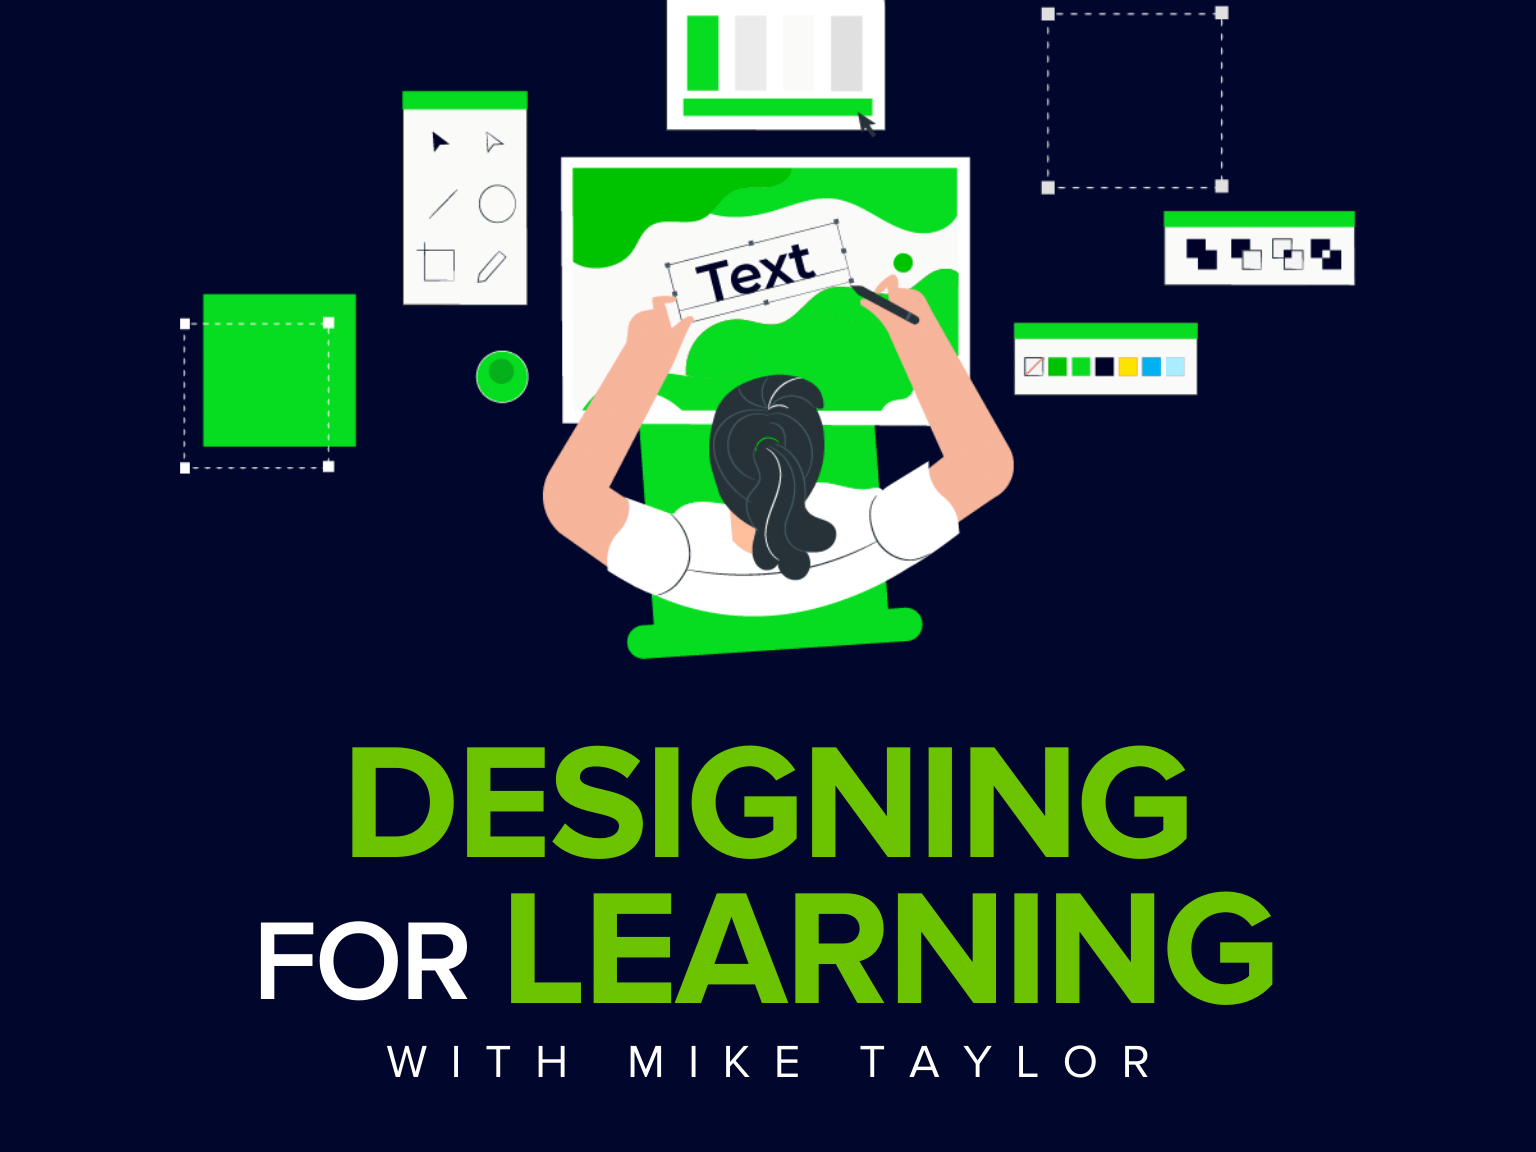 Designing for Learning with Mike Taylor